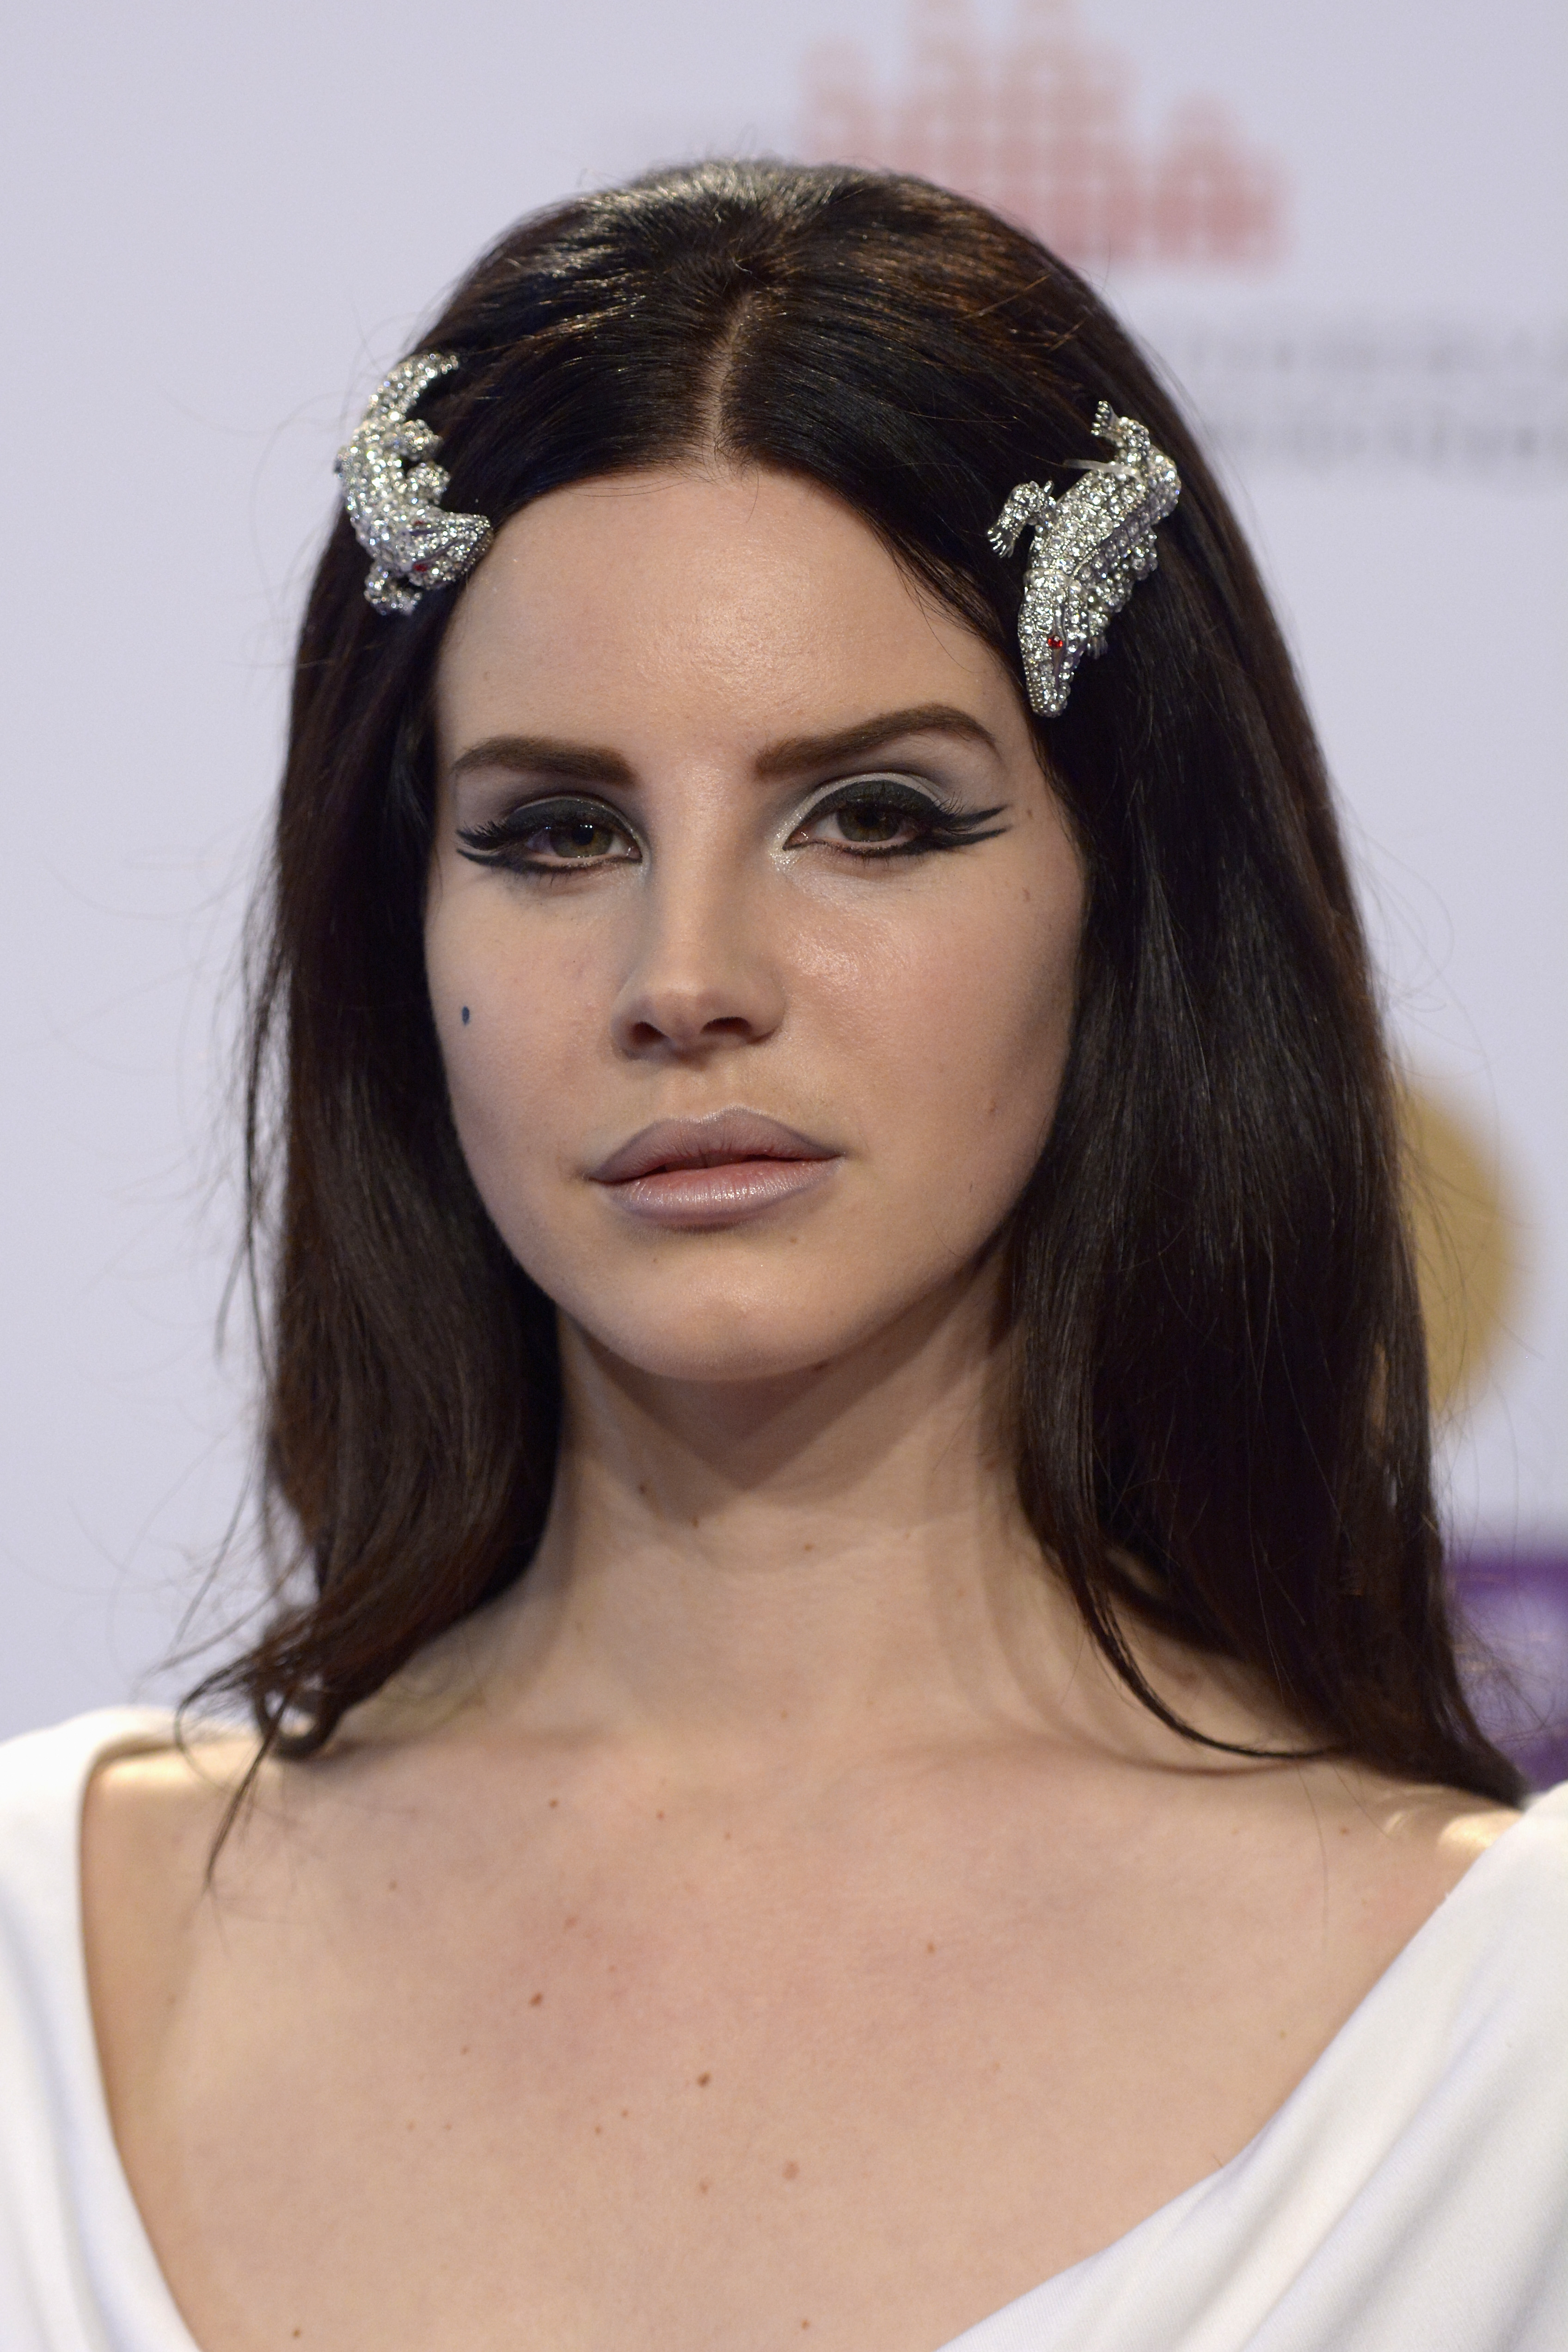 lana del rey with dark hair, diamnond alligator hair clips and double-winged eyeliner